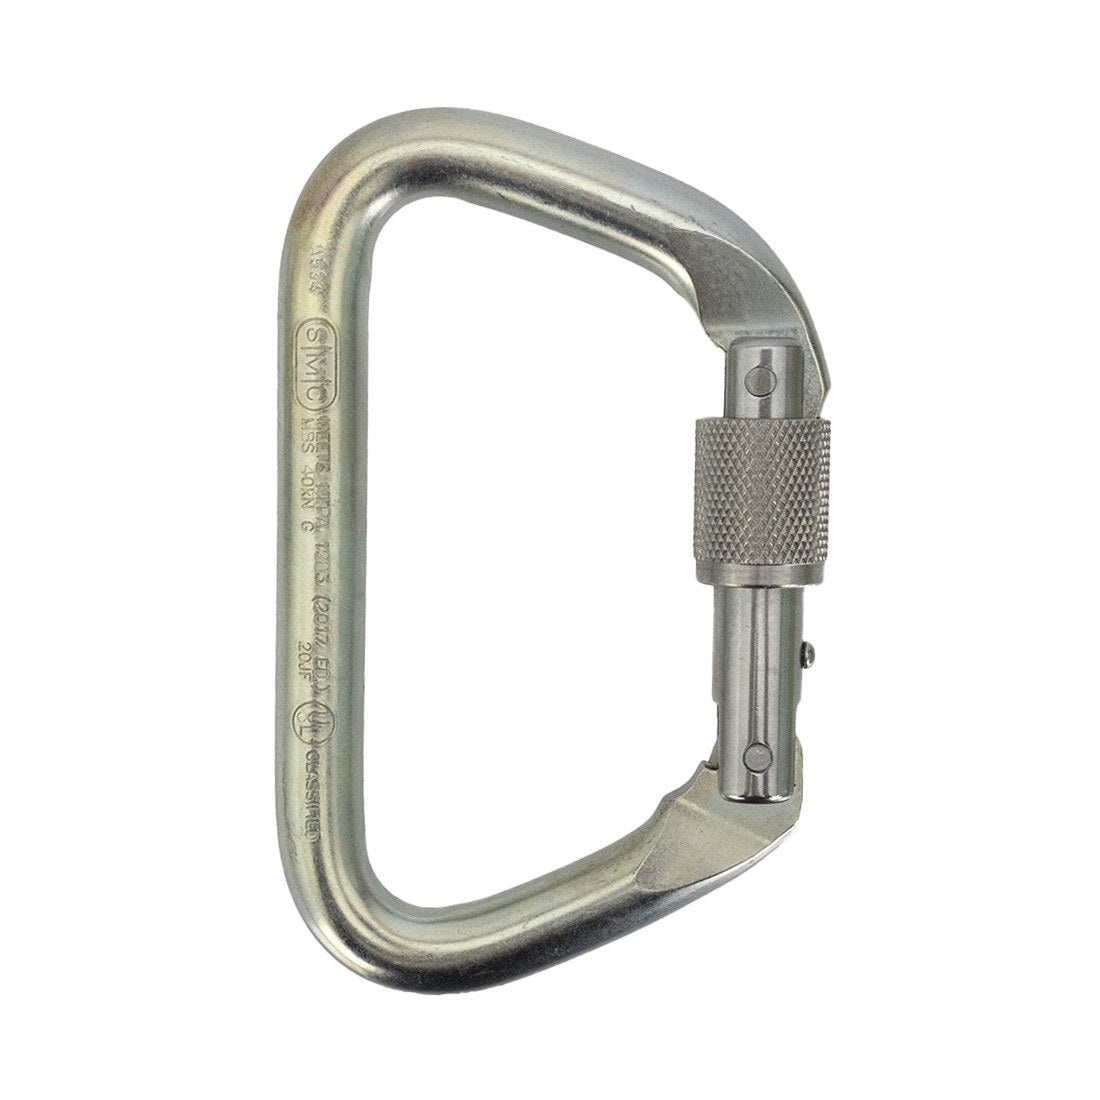 SMC NFPA Steel Locking Carabiner - Large Front View